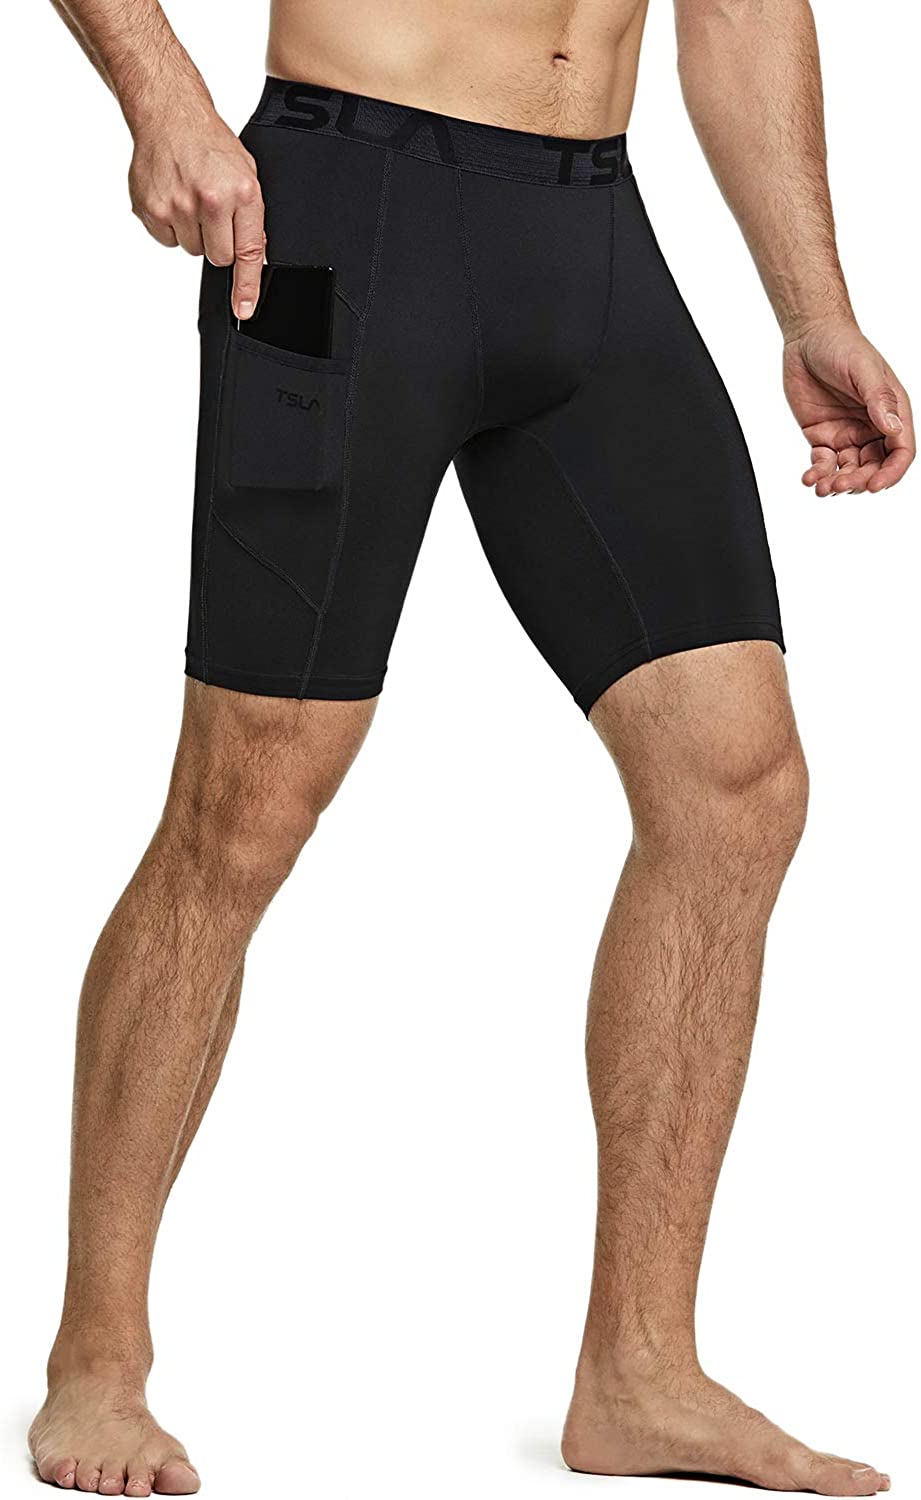 Sports Performance Active Cool Dry Running Tights TSLA 1 2 or 3 Pack Men's Athletic Compression Shorts